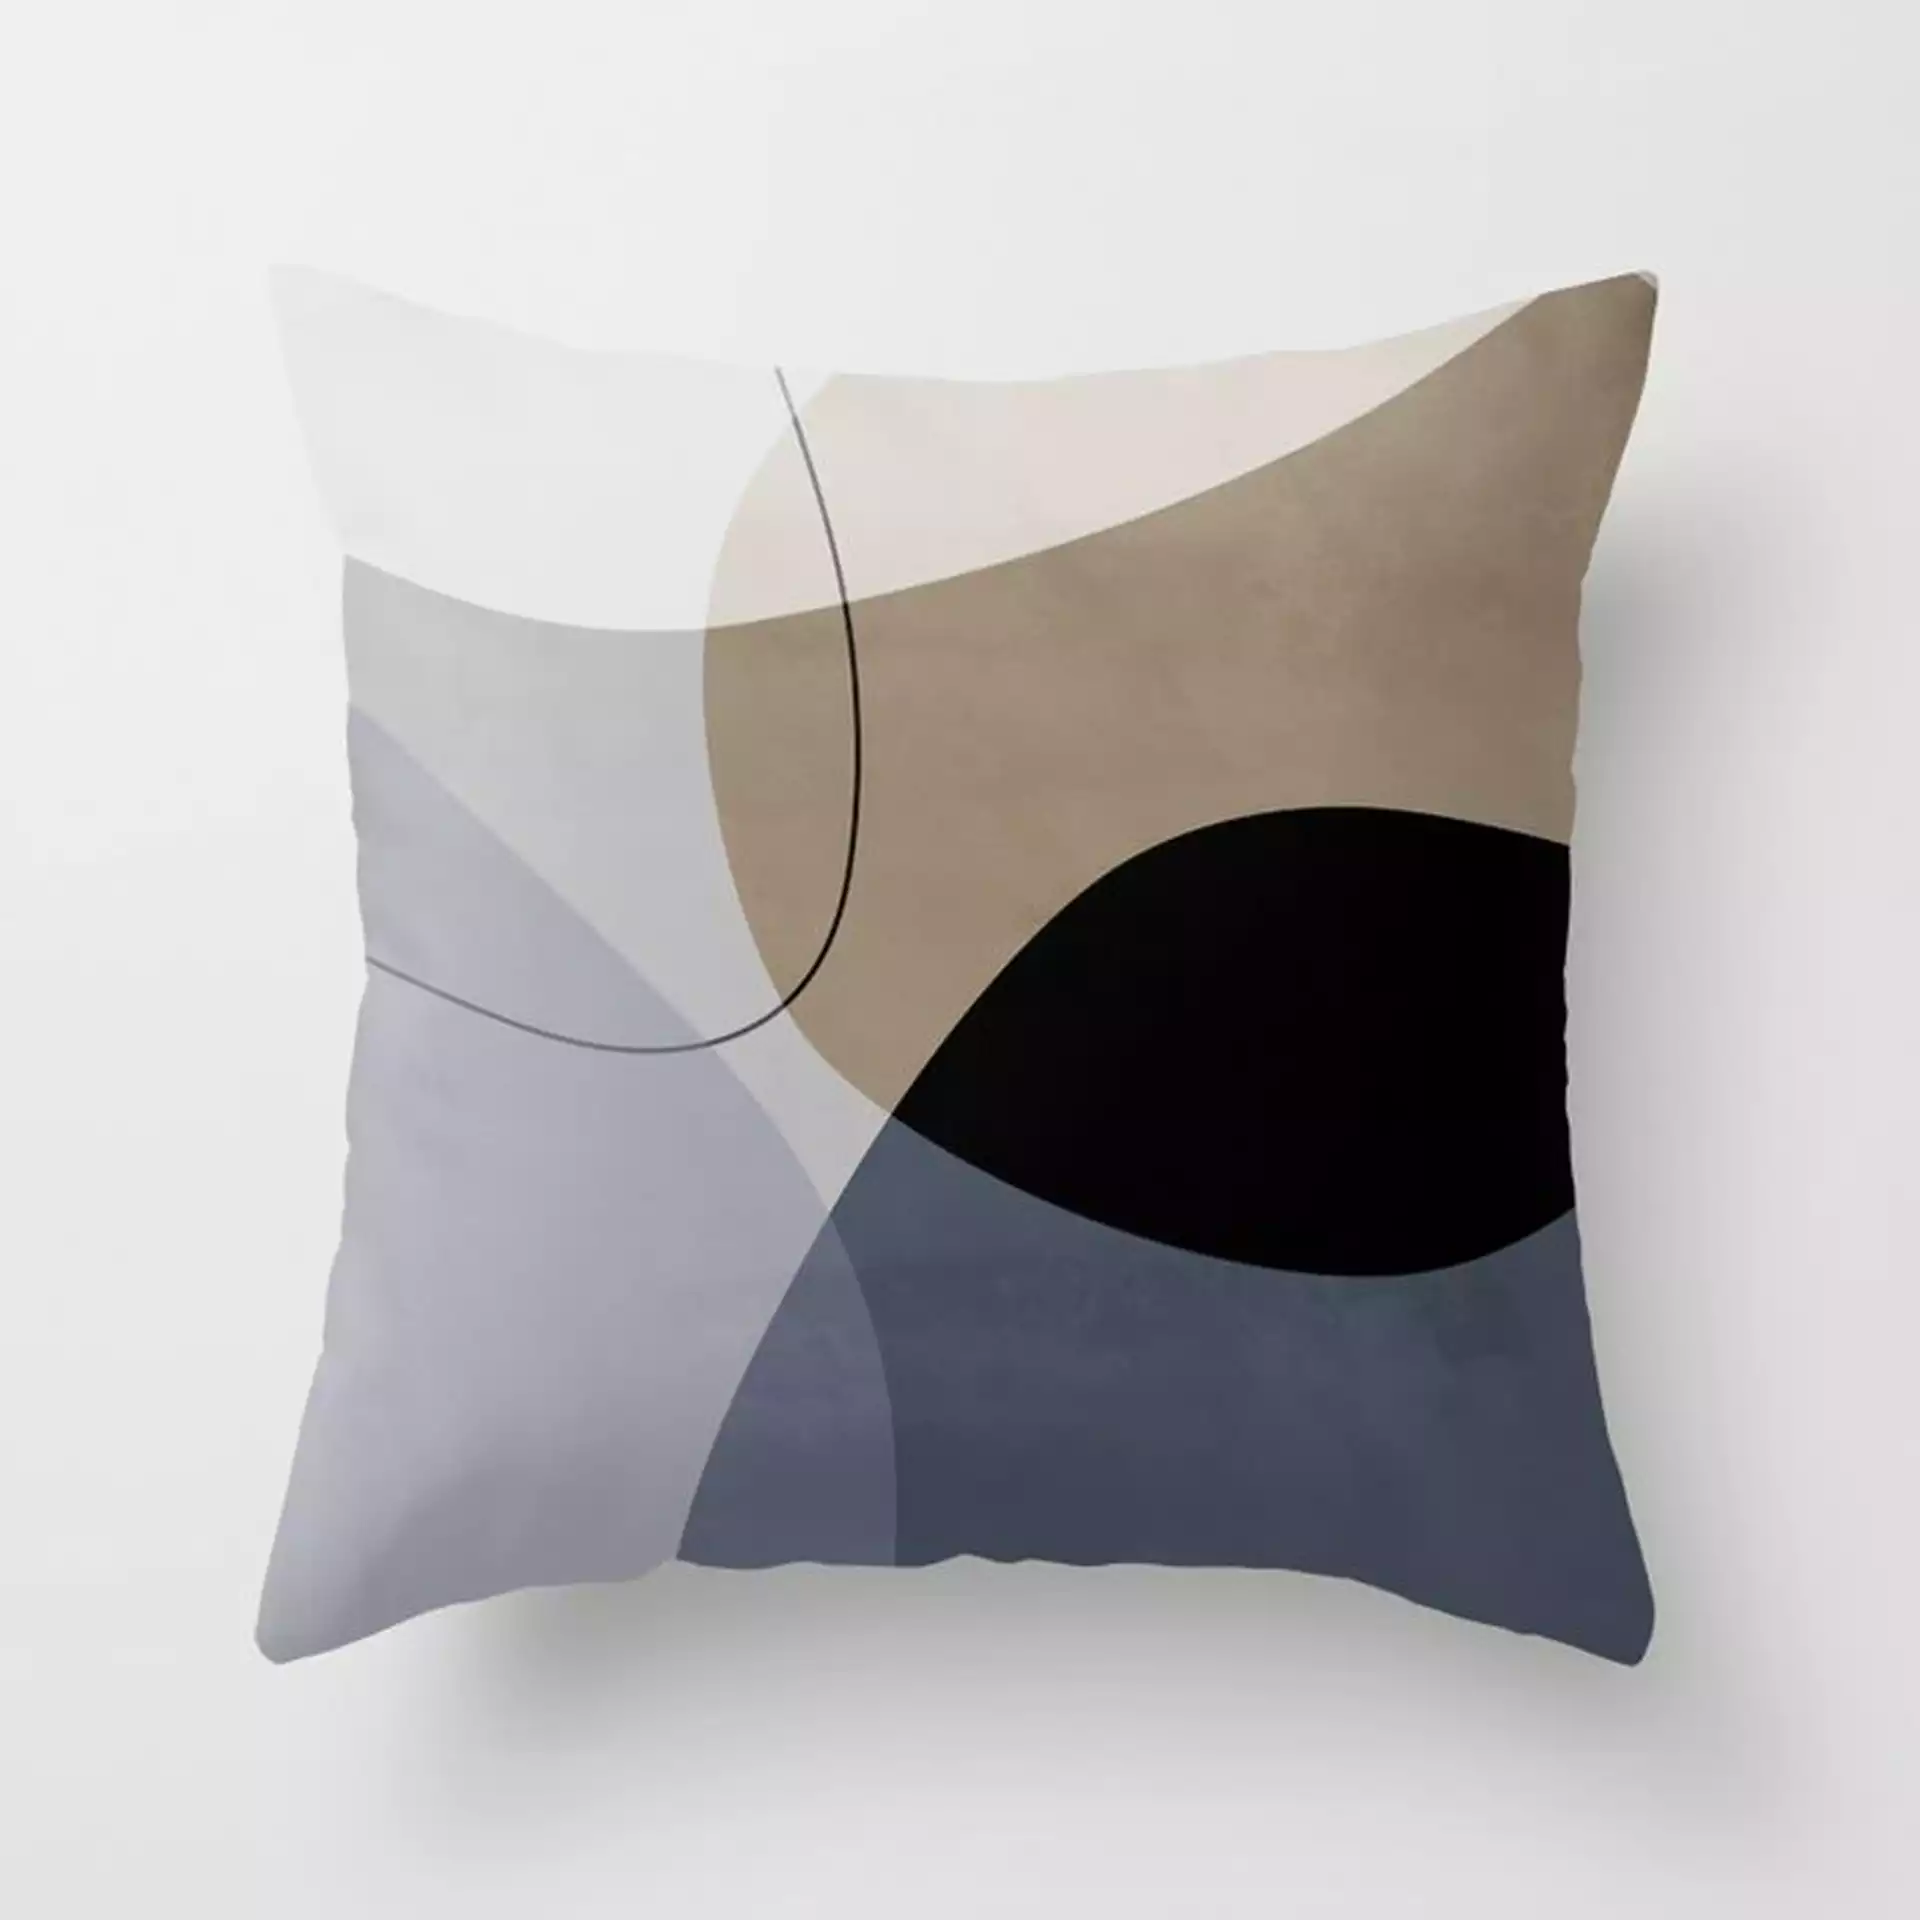 Graphic 210y Couch Throw Pillow by Mareike BaPhmer - Cover (18" x 18") with pillow insert - Indoor Pillow